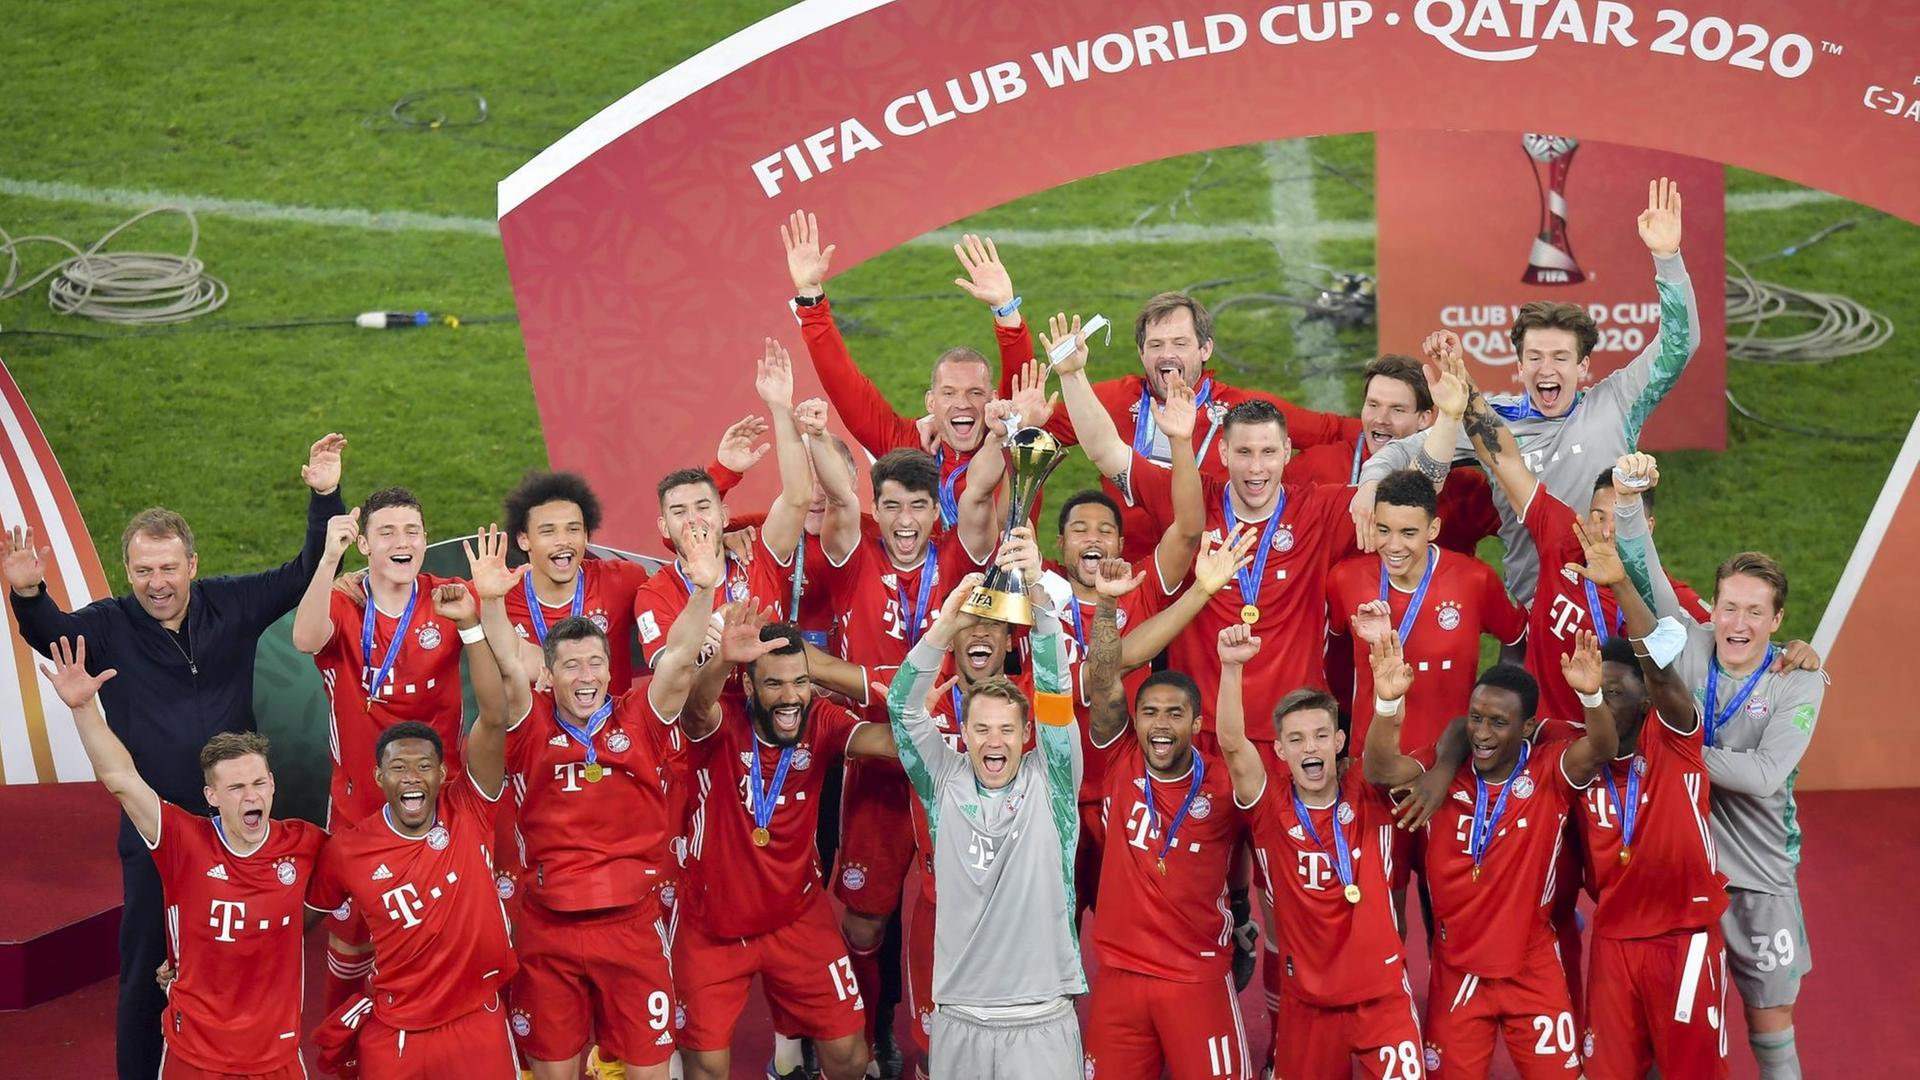 210212 -- DOHA, Feb. 12, 2021 -- Bayern s goalkeeper Manuel Neuer front holds up the trophy as players of Bayern Munich celebrate with the trophy after winning the FIFA Club World final match between Germany s Bayern Munich and Mexico s Tigres Uanl at the Education City Stadium in Doha, Qatar, Feb. 11, 2021. Photo by /Xinhua SPQATAR-DOHA-FIFA CLUB WORLD CUP-BAYERN MUNICH VS TIGERS UANL Nikku PUBLICATIONxNOTxINxCHN